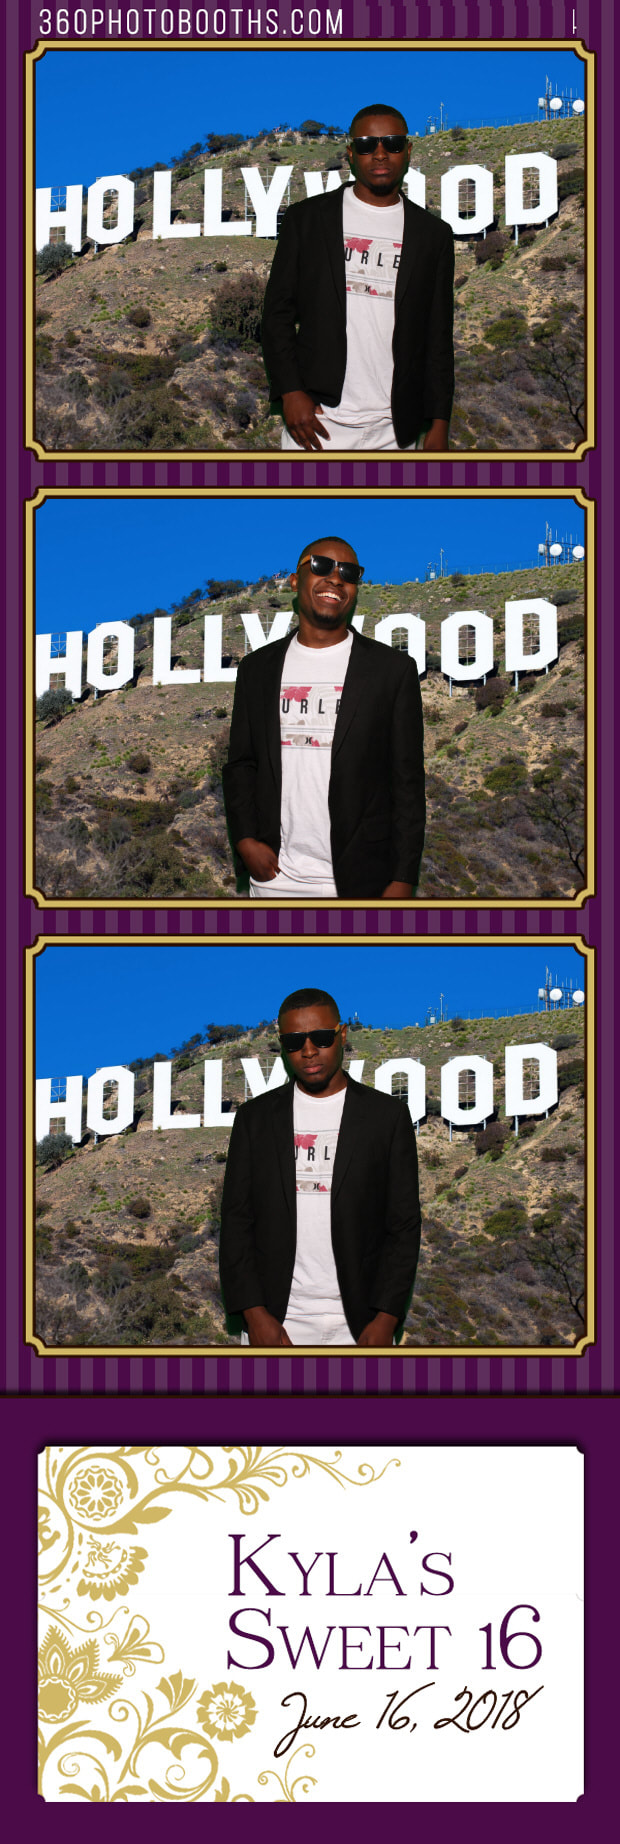 photo booth hollywood green screen